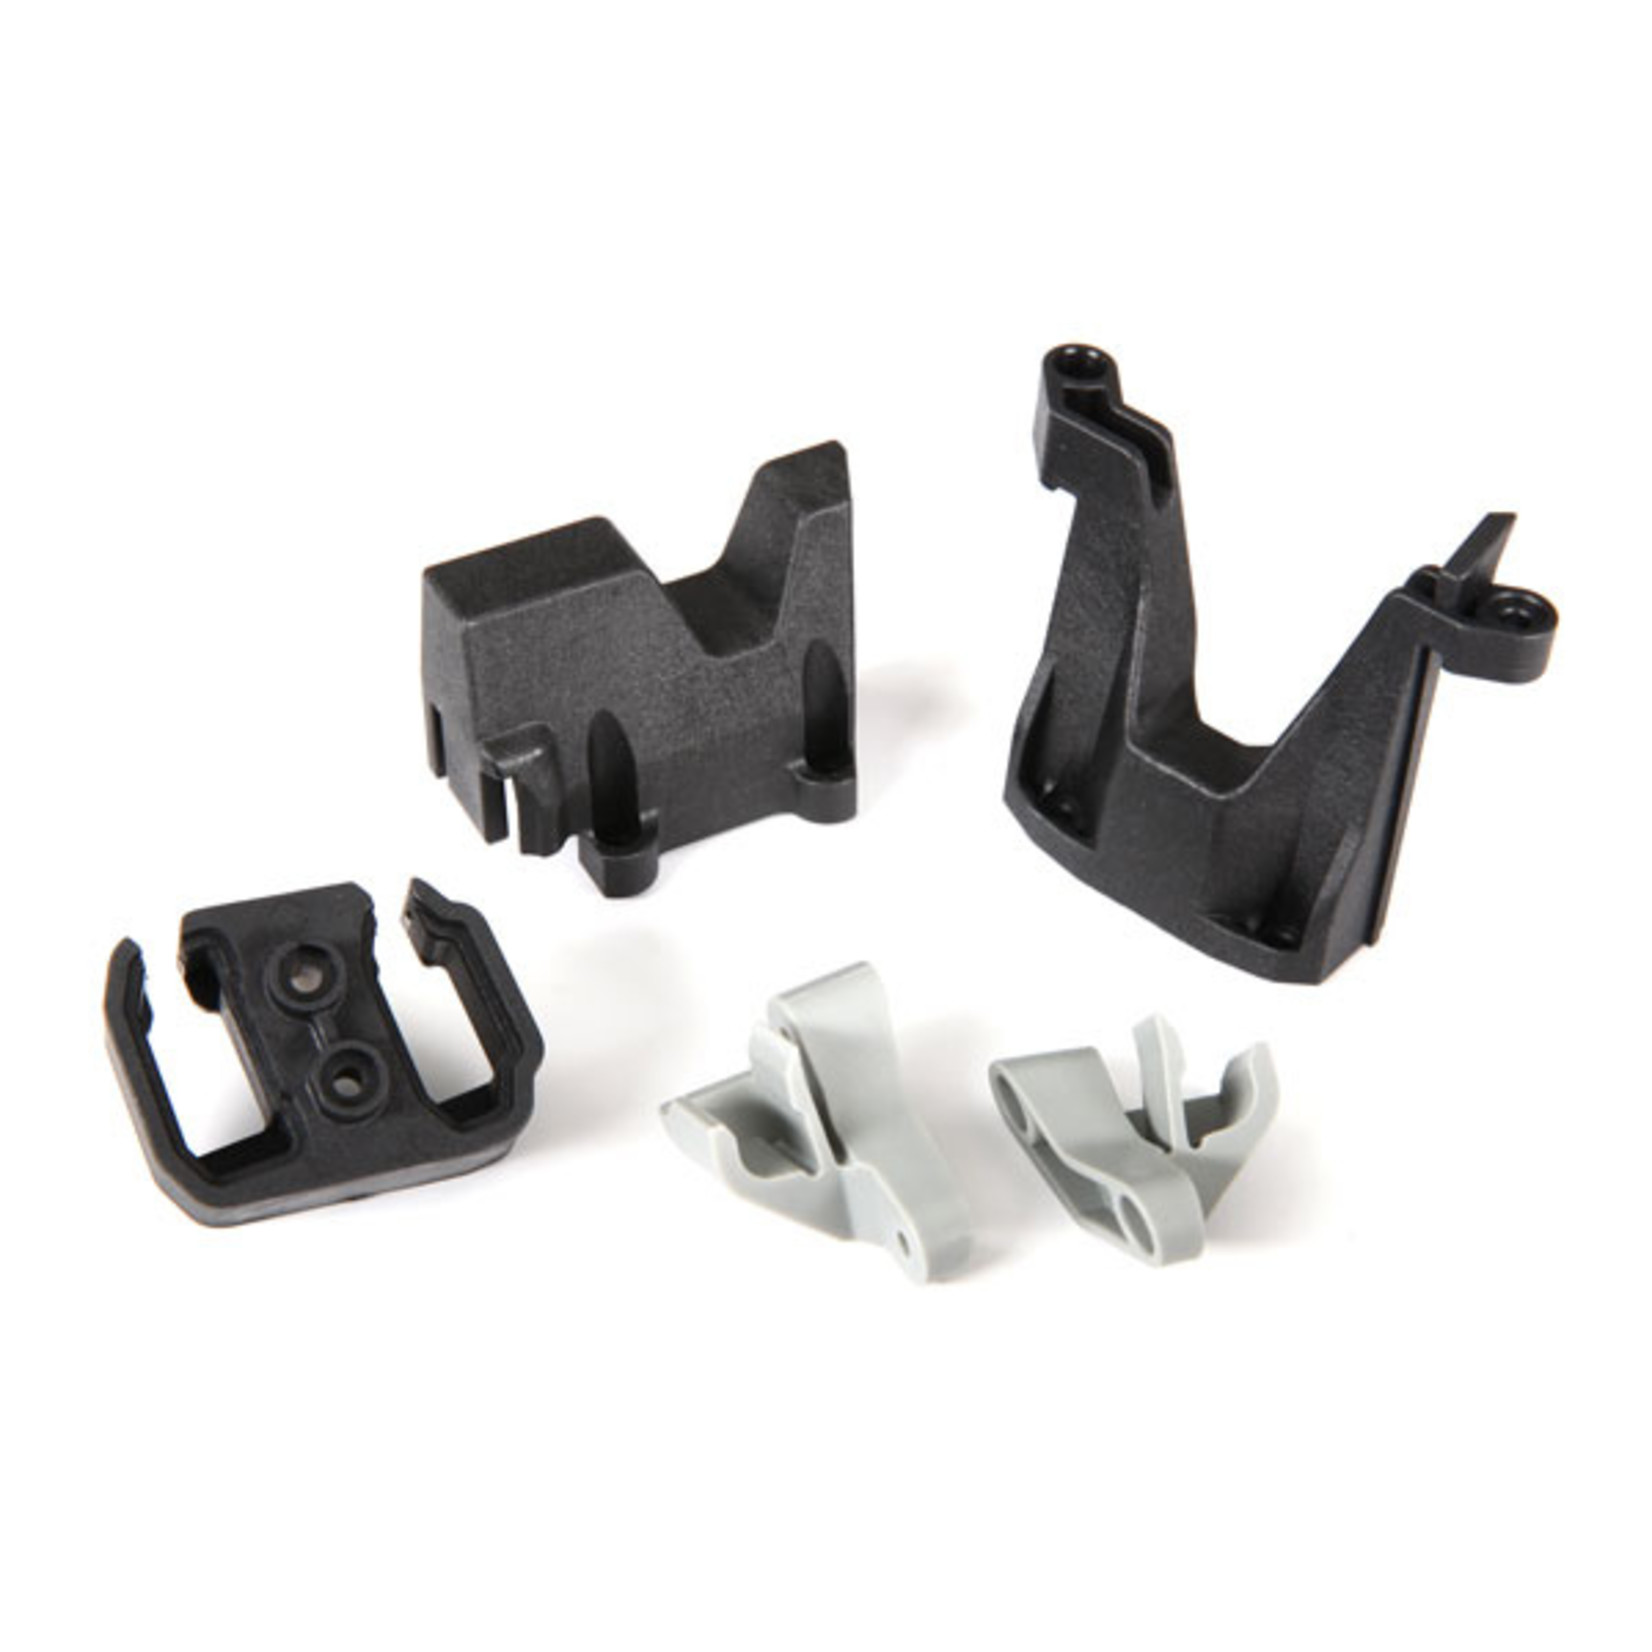 Traxxas 8525 - Battery connector retainer/ wall support/ f